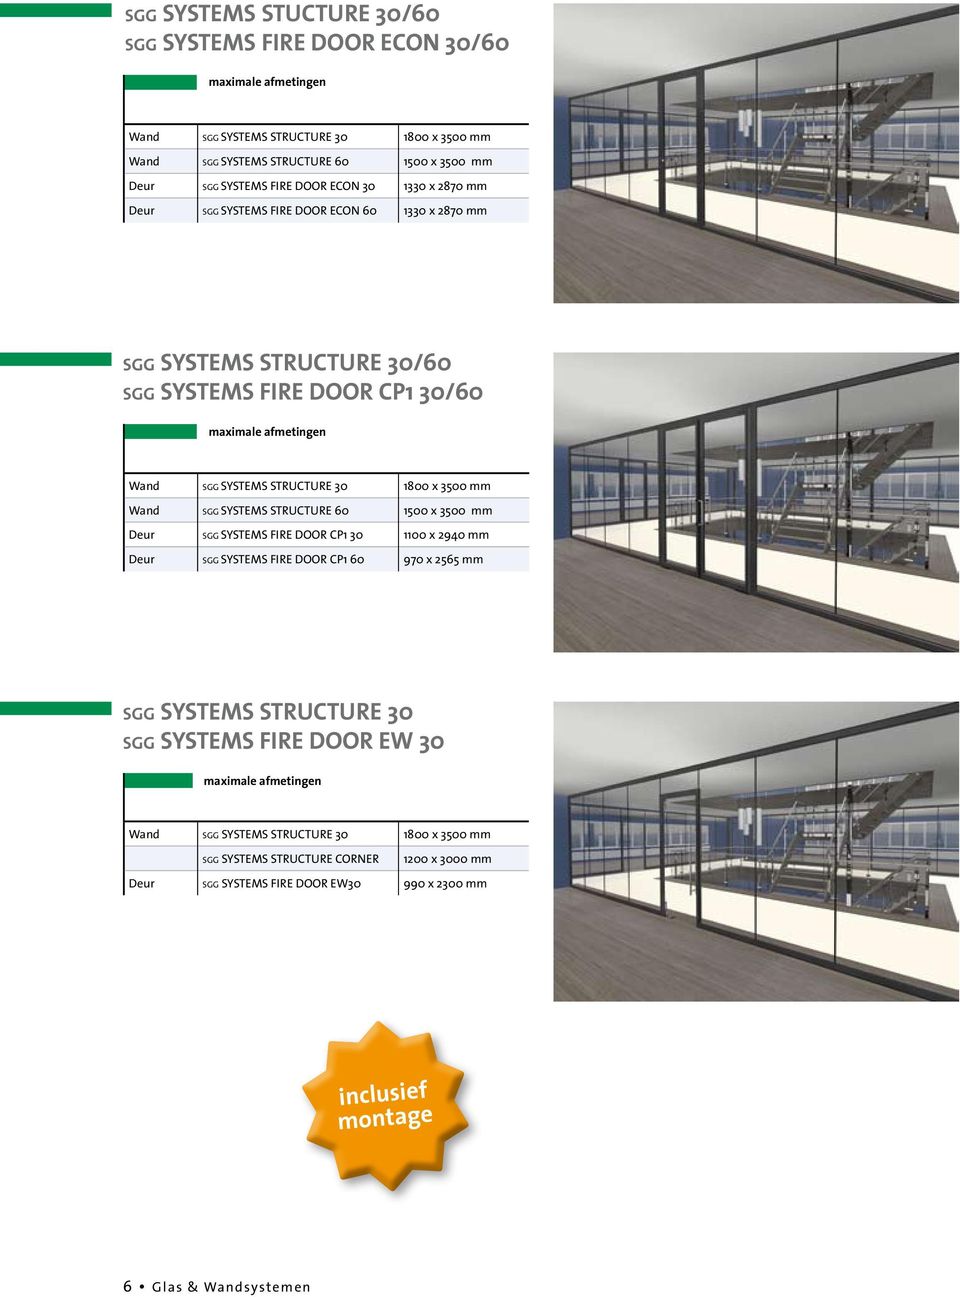 3500 mm Wand SGG SYSTEMS STRUCTURE 60 1500 x 3500 mm Deur SGG SYSTEMS FIRE DOOR CP1 30 1100 x 2940 mm Deur SGG SYSTEMS FIRE DOOR CP1 60 970 x 2565 mm SGG SYSTEMS STRUCTURE 30 SGG SYSTEMS FIRE